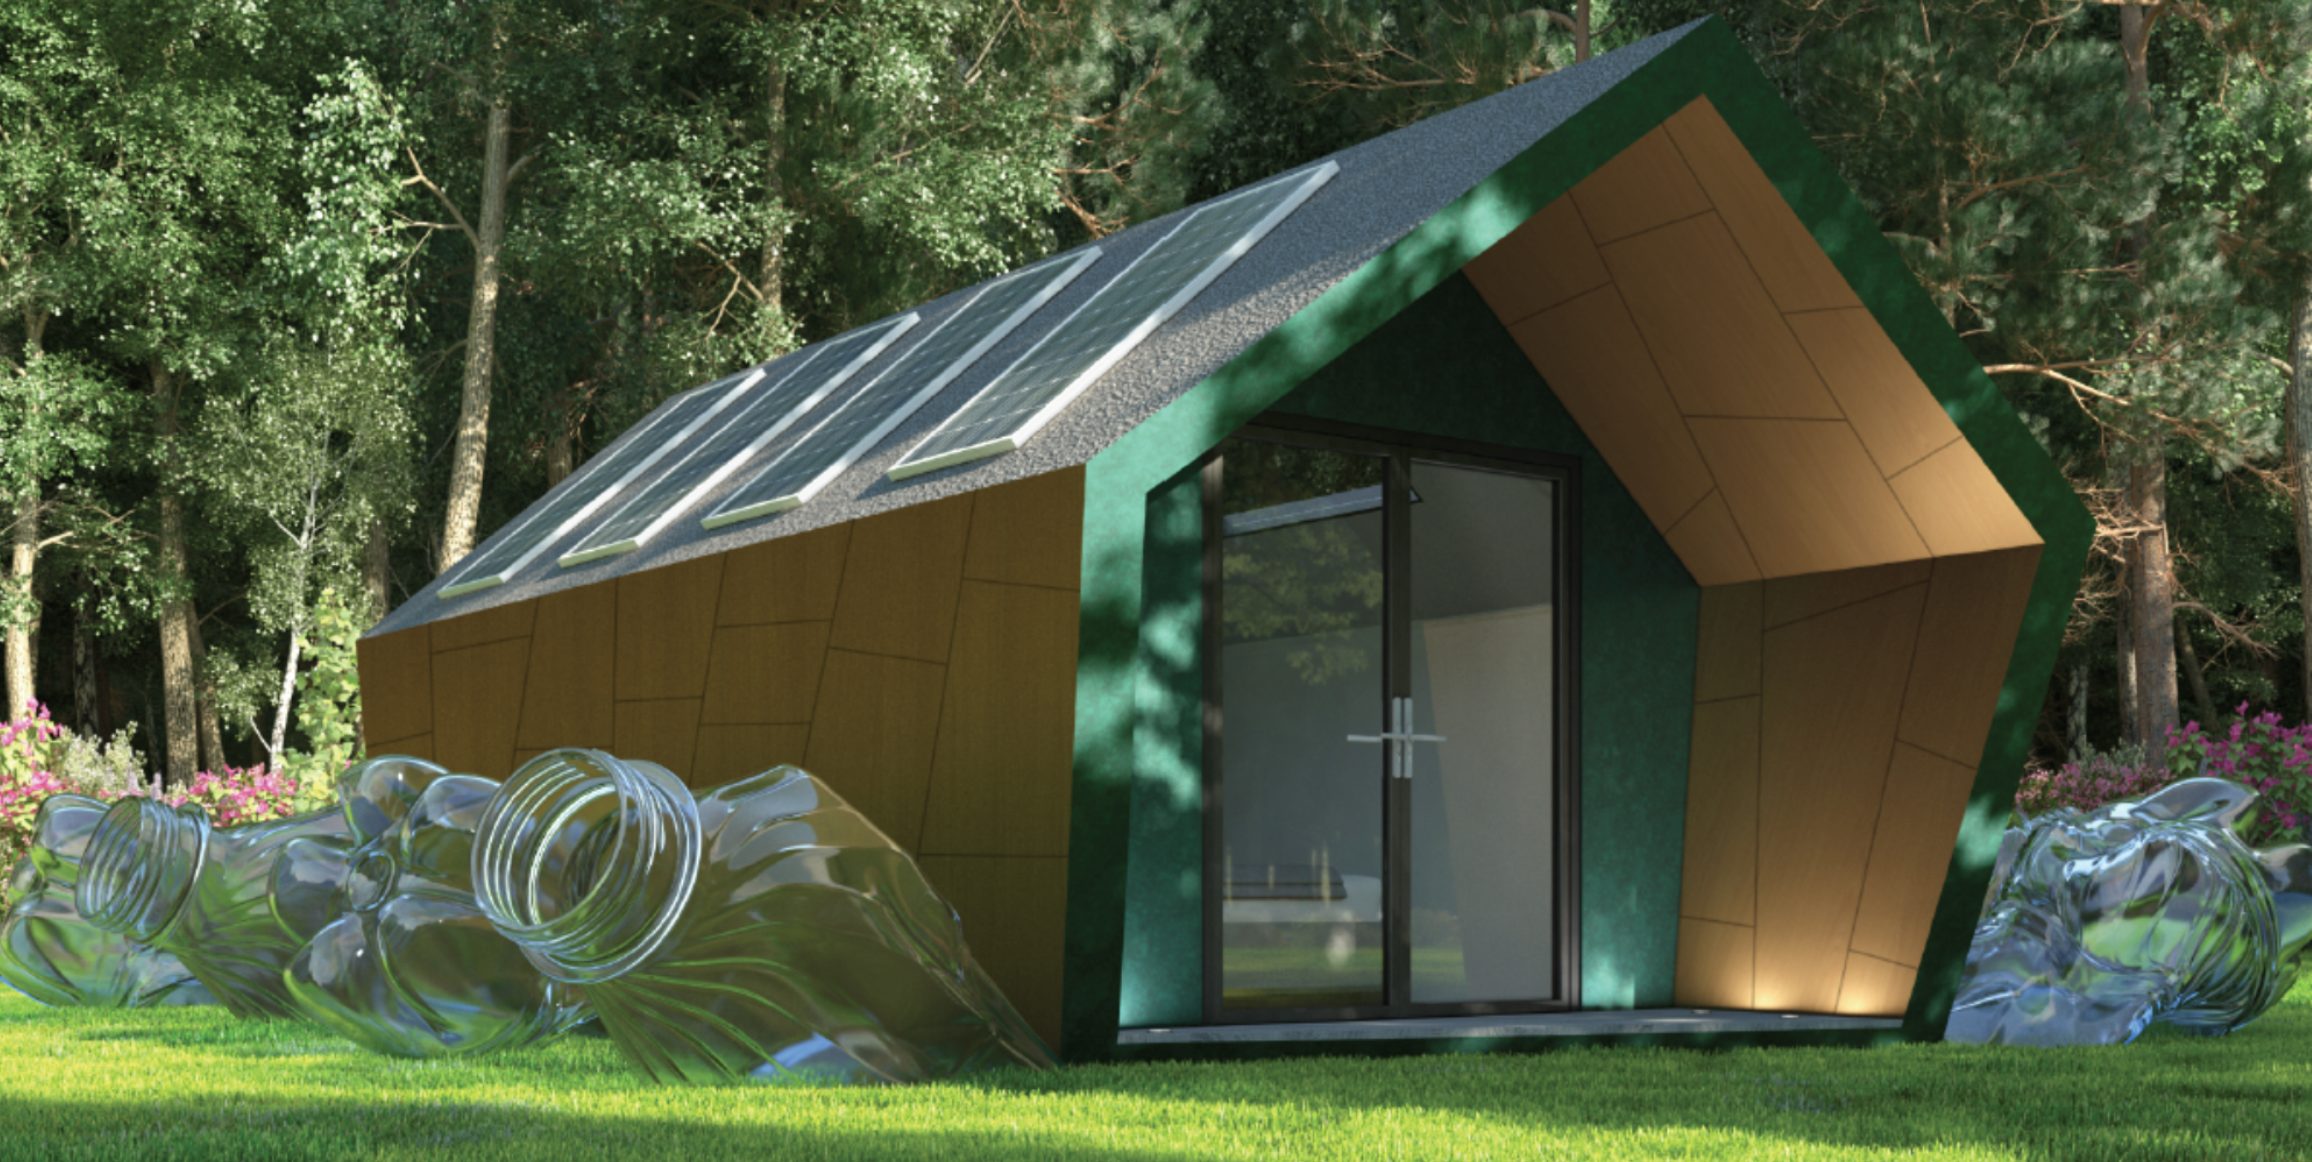 iForm 99% recycled plastic House